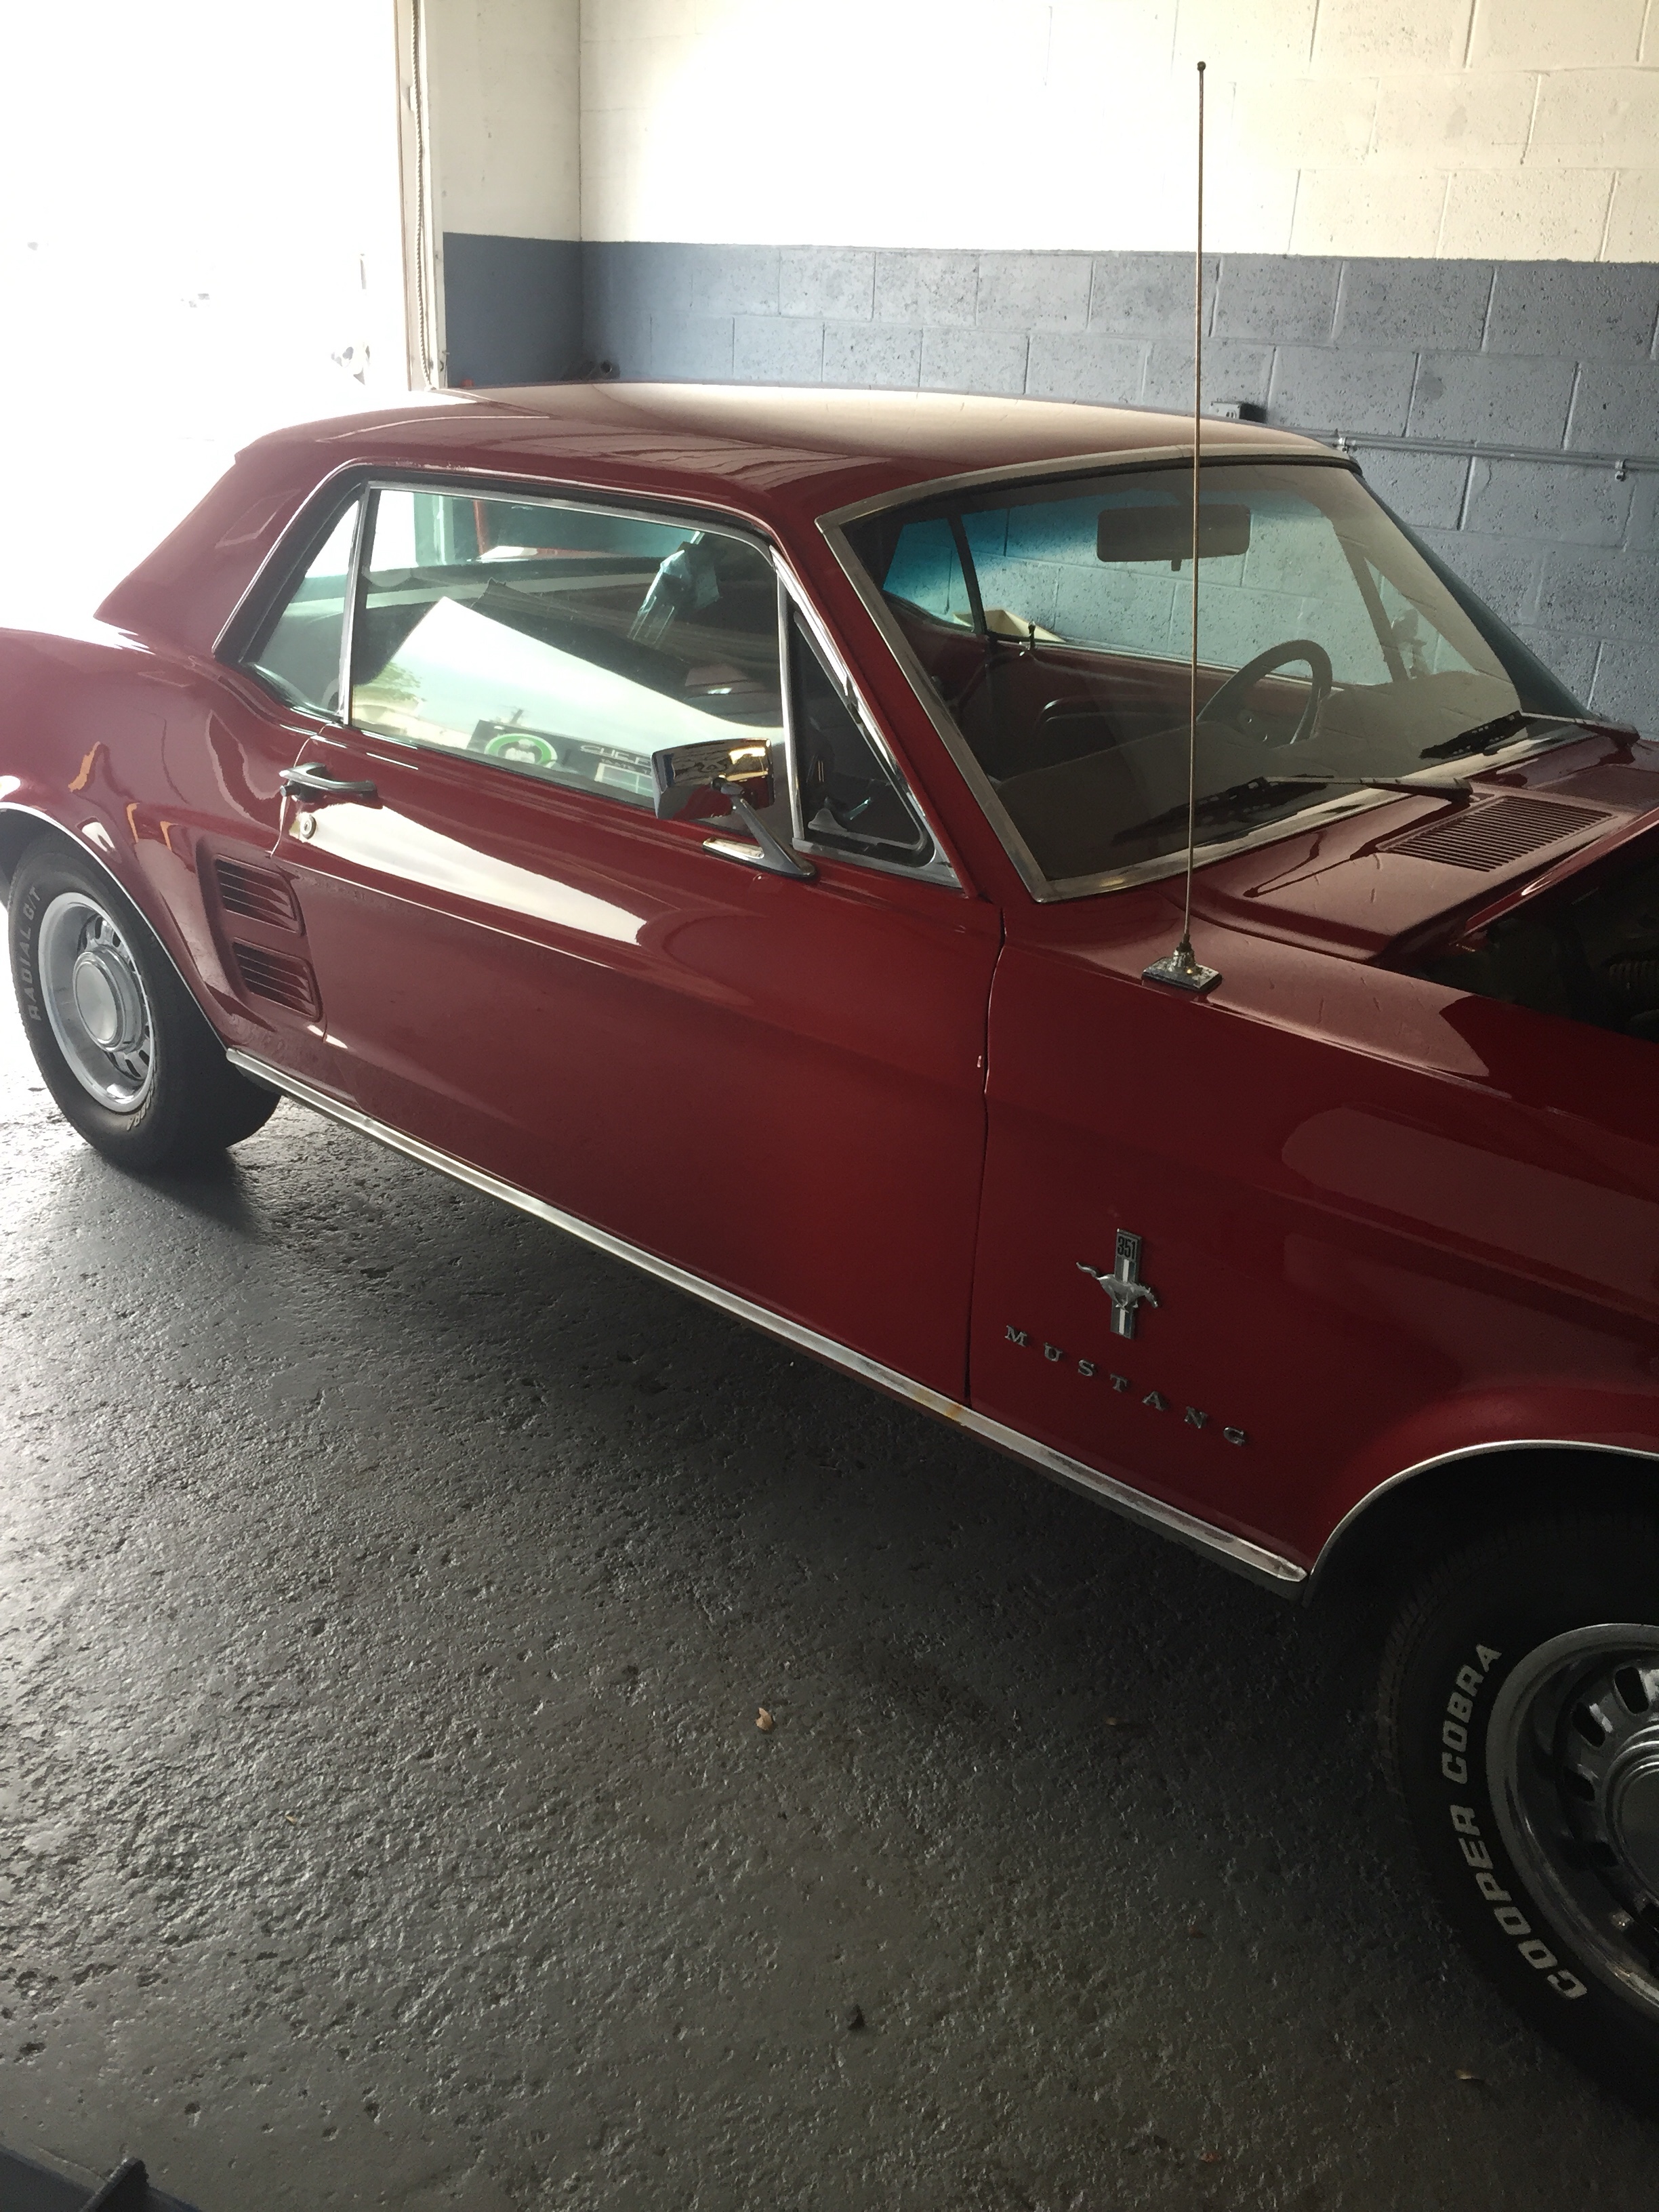 Putting the final touches on this 1968 Mustang restoration